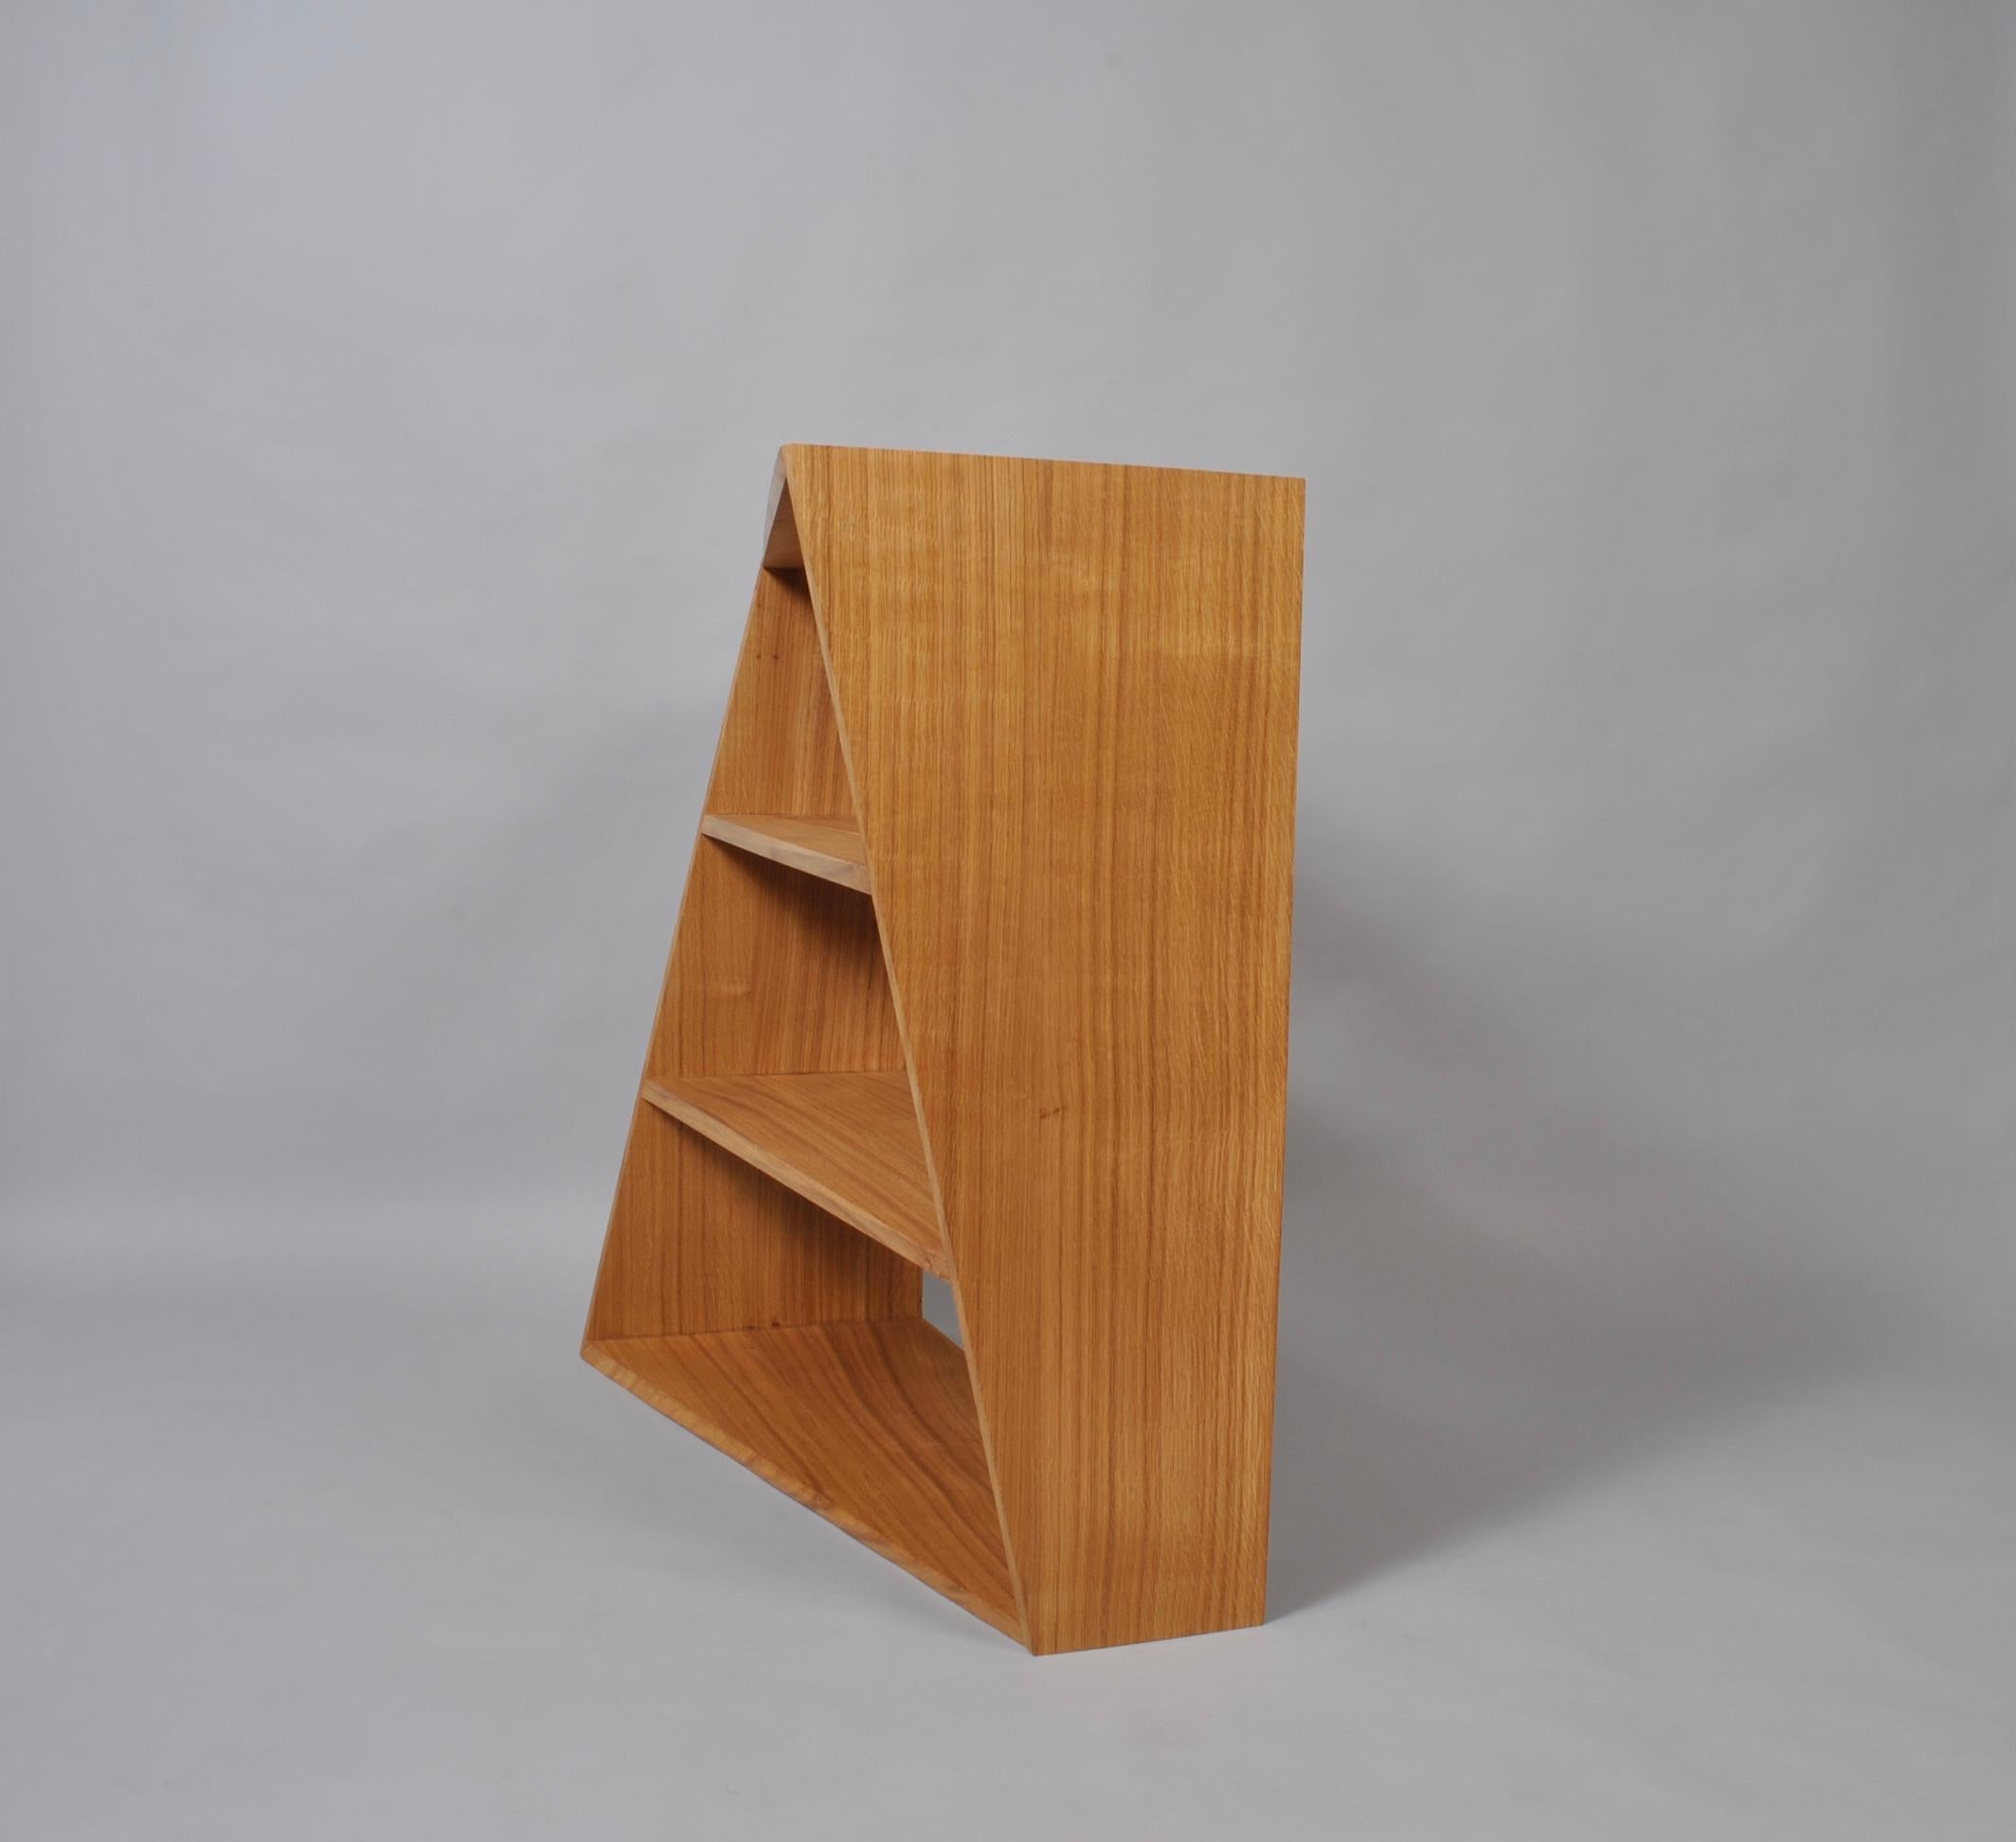 The large Postmodern oak units can be either wall-mounted or freestanding. The acute twisted angle design fools the eye in a similar fashion to the Penrose and Escher staircase. The shelf fronts have a twisting bevelled edge that neatly turns to